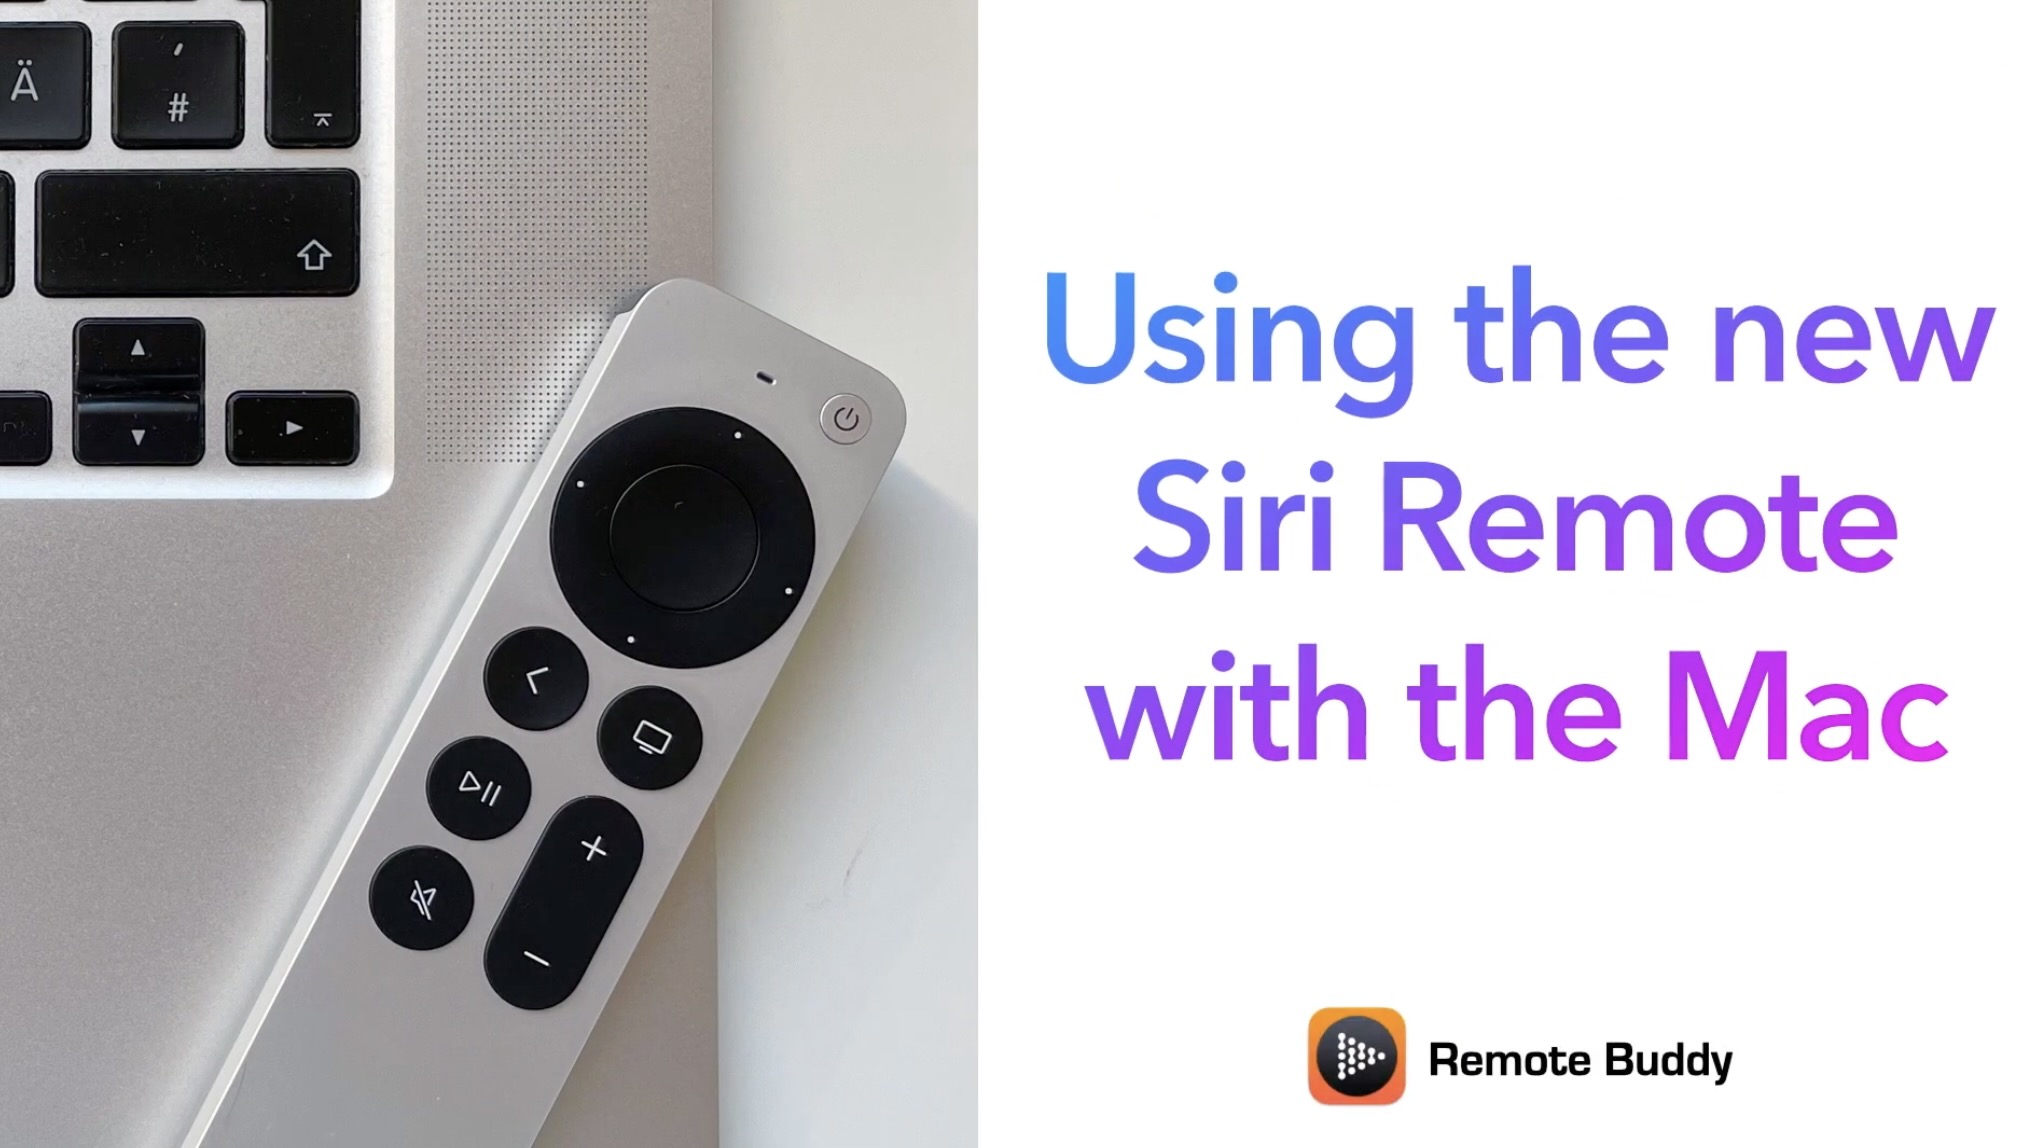 New Siri support comes to Mac for presentations, media, more with Remote Buddy - 9to5Mac